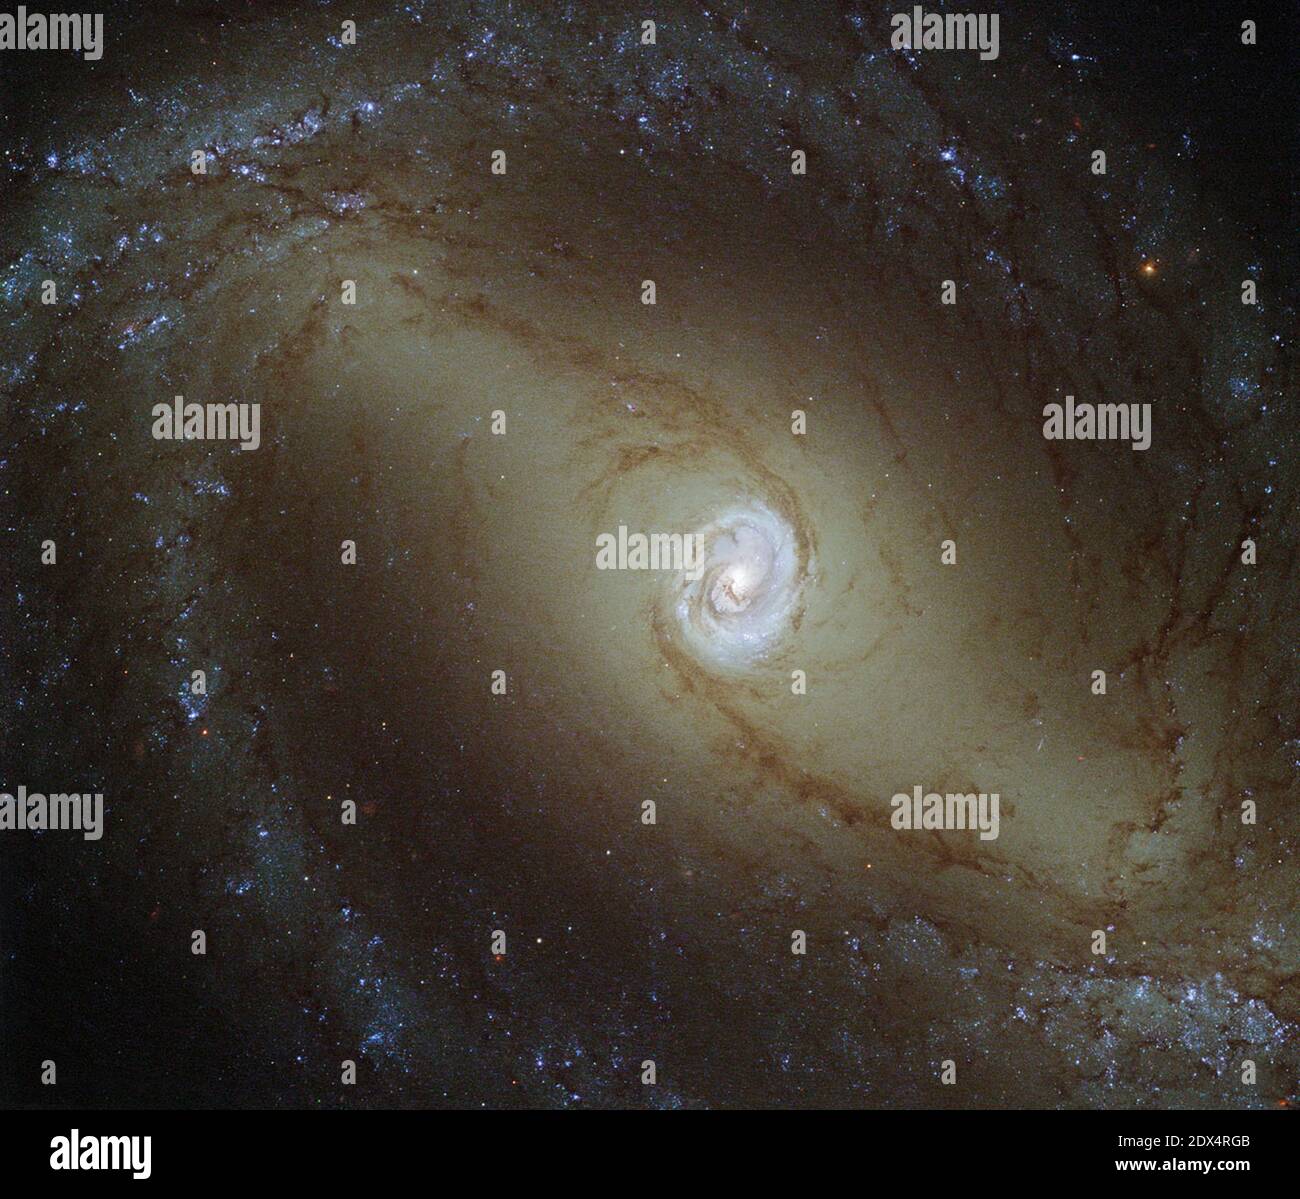 This view, captured by the NASA/ESA Hubble Space Telescope, shows a nearby spiral galaxy known as NGC 1433. At about 32 million light-years from Earth, it is a type of very active galaxy known as a Seyfert galaxy a classification that accounts for 10% of all galaxies. They have very bright, luminous centres comparable to that of our galaxy, the Milky Way. Galaxy cores are of great interest to astronomers. The centres of most, if not all, galaxies are thought to contain a supermassive black hole, surrounded by a disc of infalling material. NGC 1433 is being studied as part of a survey of 50 nea Stock Photo